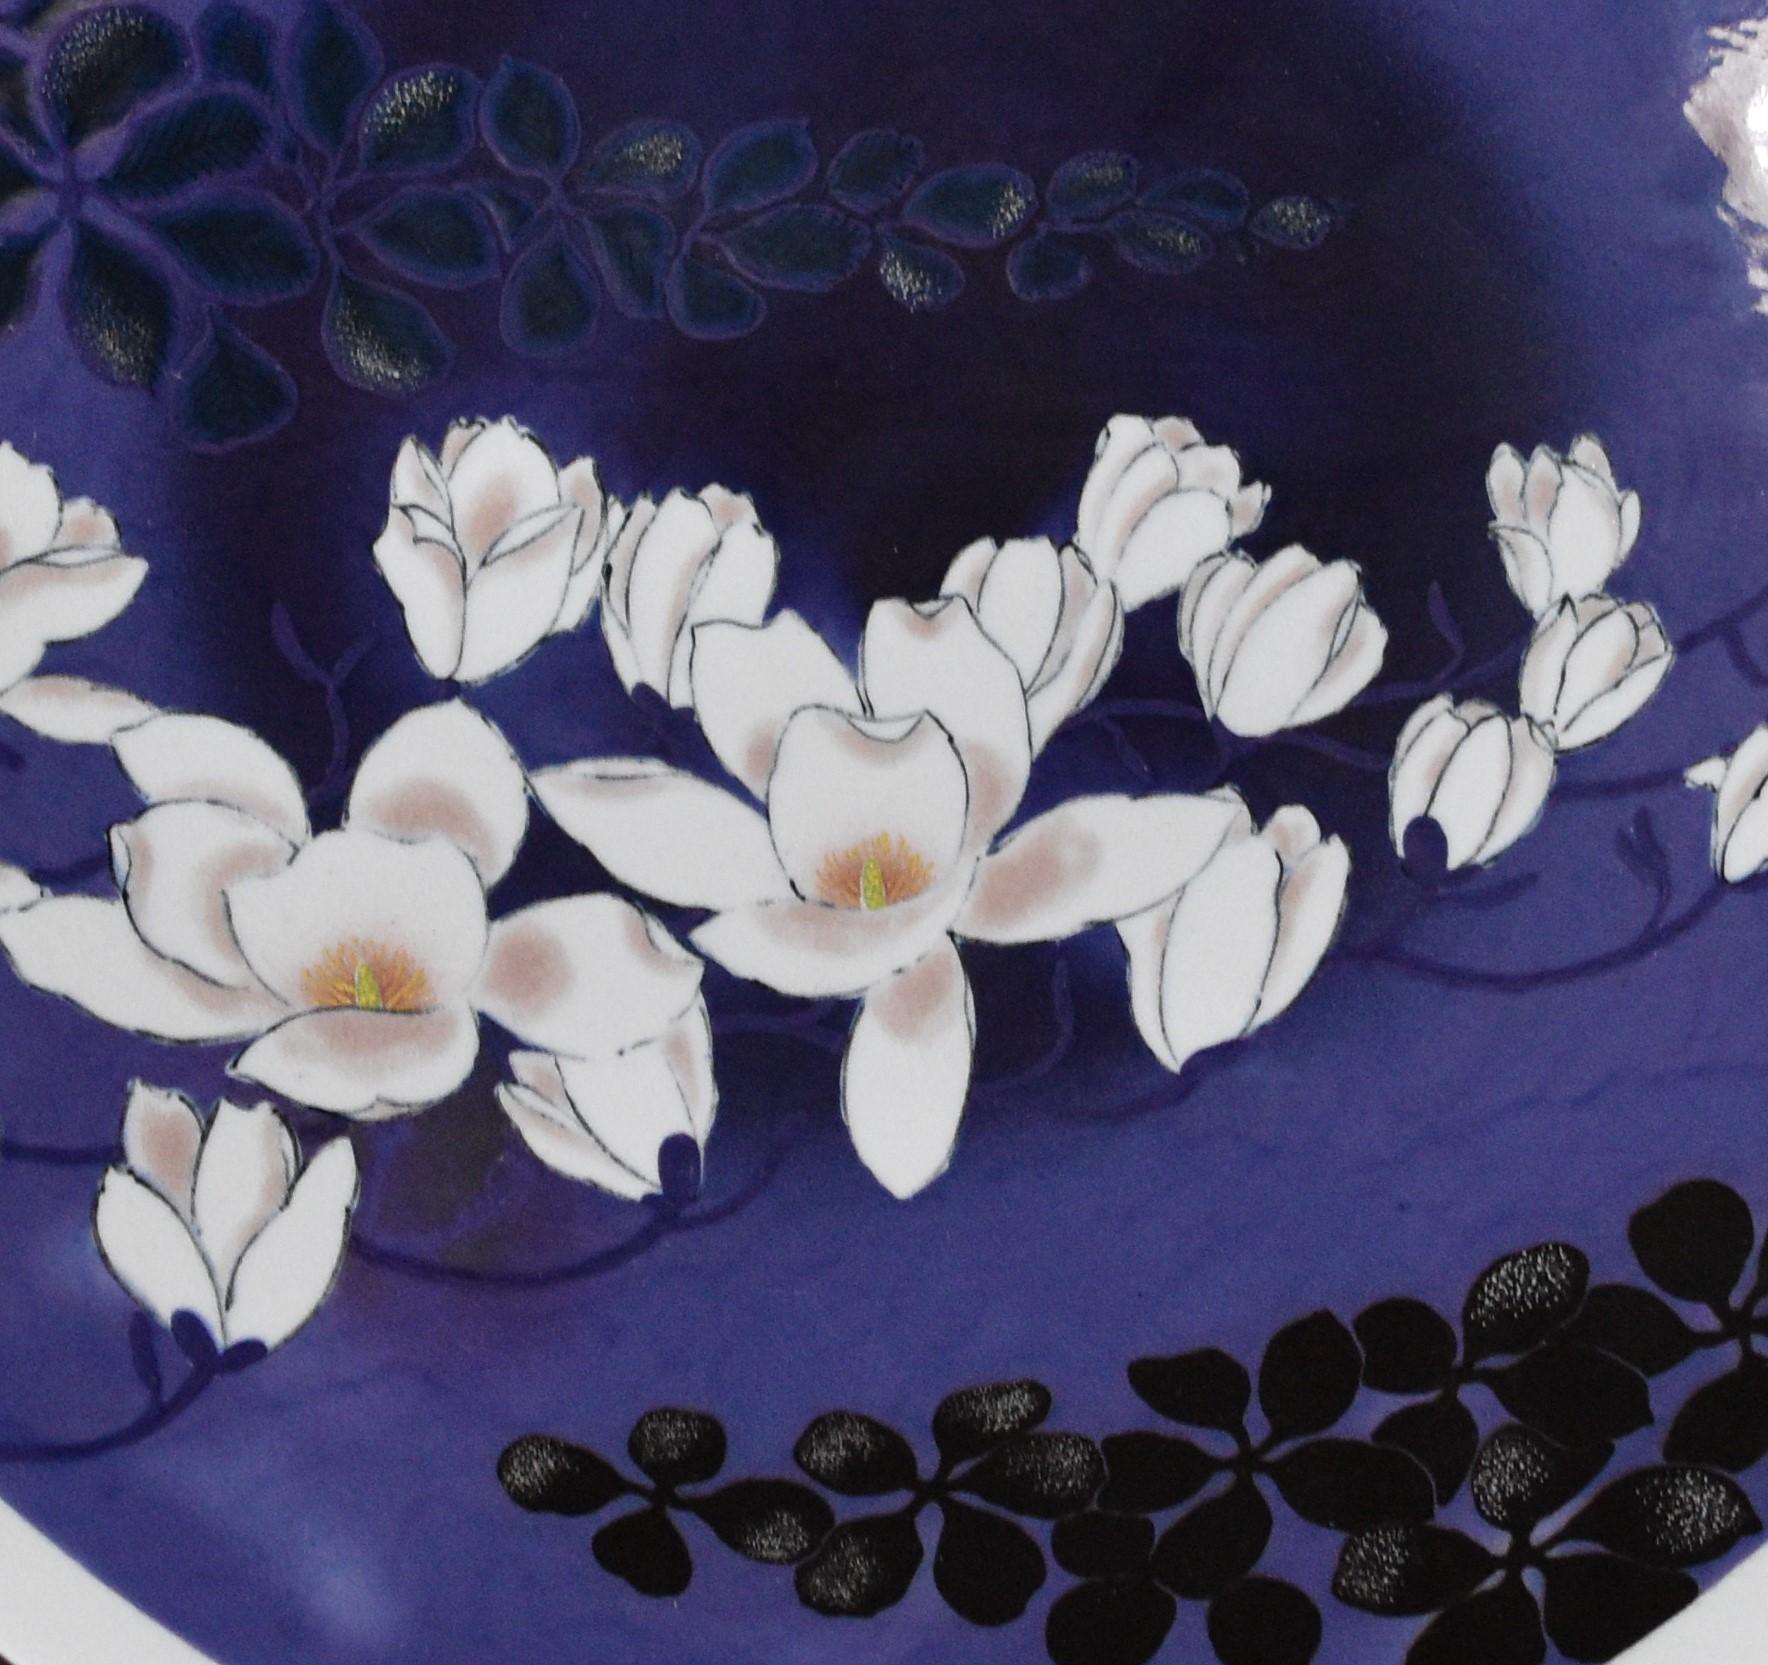 Extraordinary contemporary Japanese museum-quality decorative porcelain charger/centerpiece in a stunning soft octagonal shape, stunningly hand-painted in black and white on the artist's signature purple. It is the signed masterpiece by highly